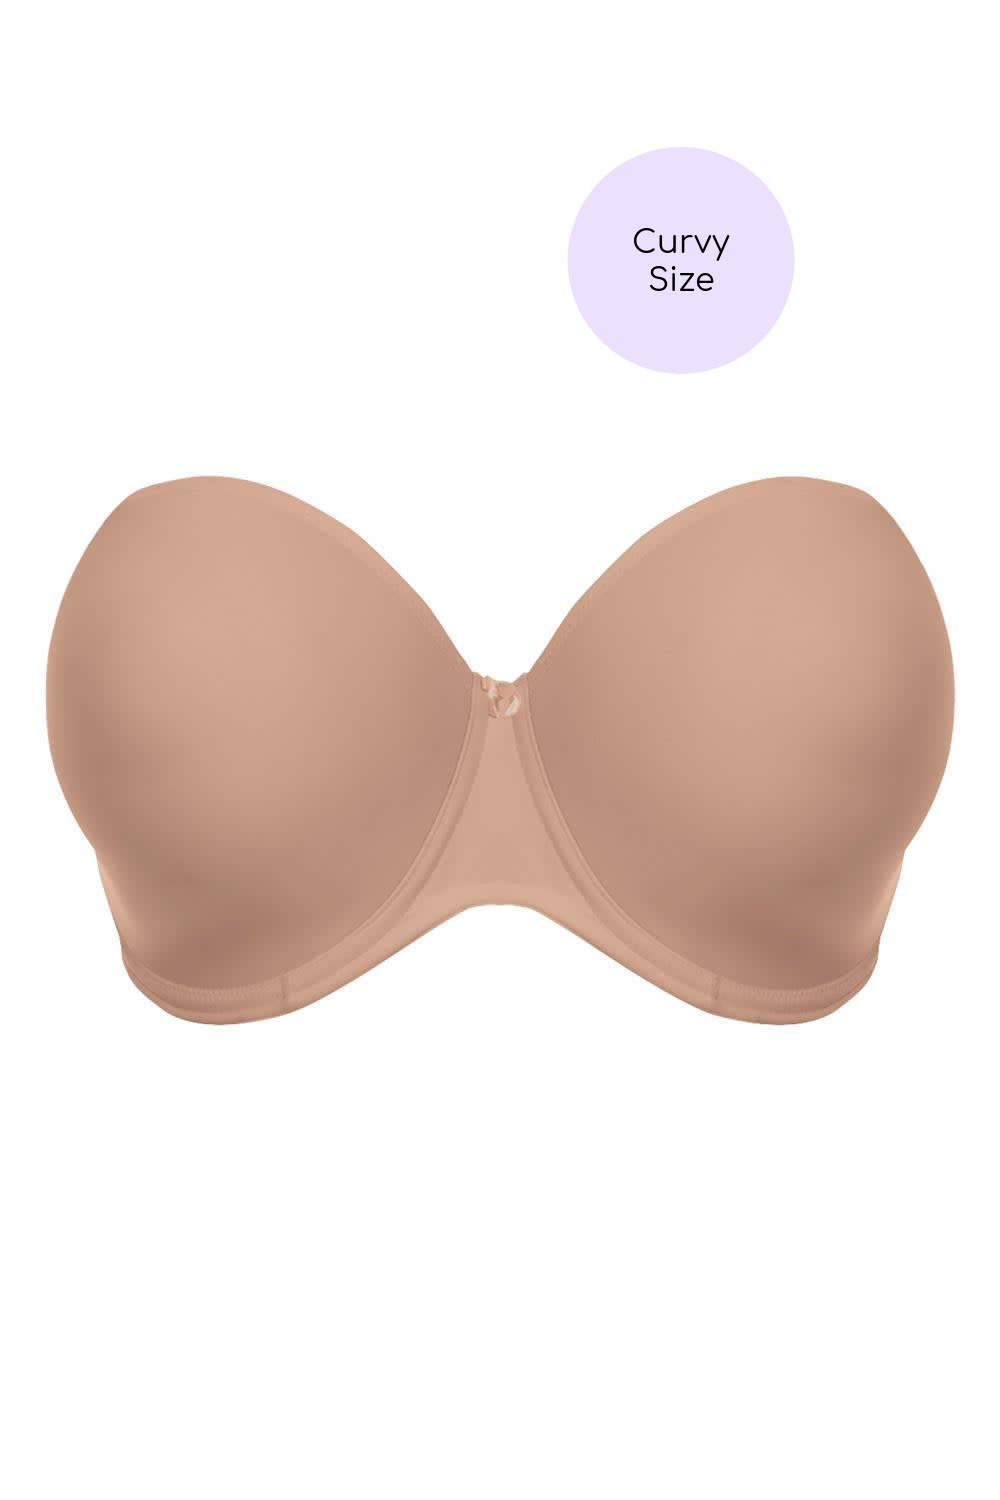 Elomi Smoothing Underwire Foam Moulded Strapless Bra Style 1230